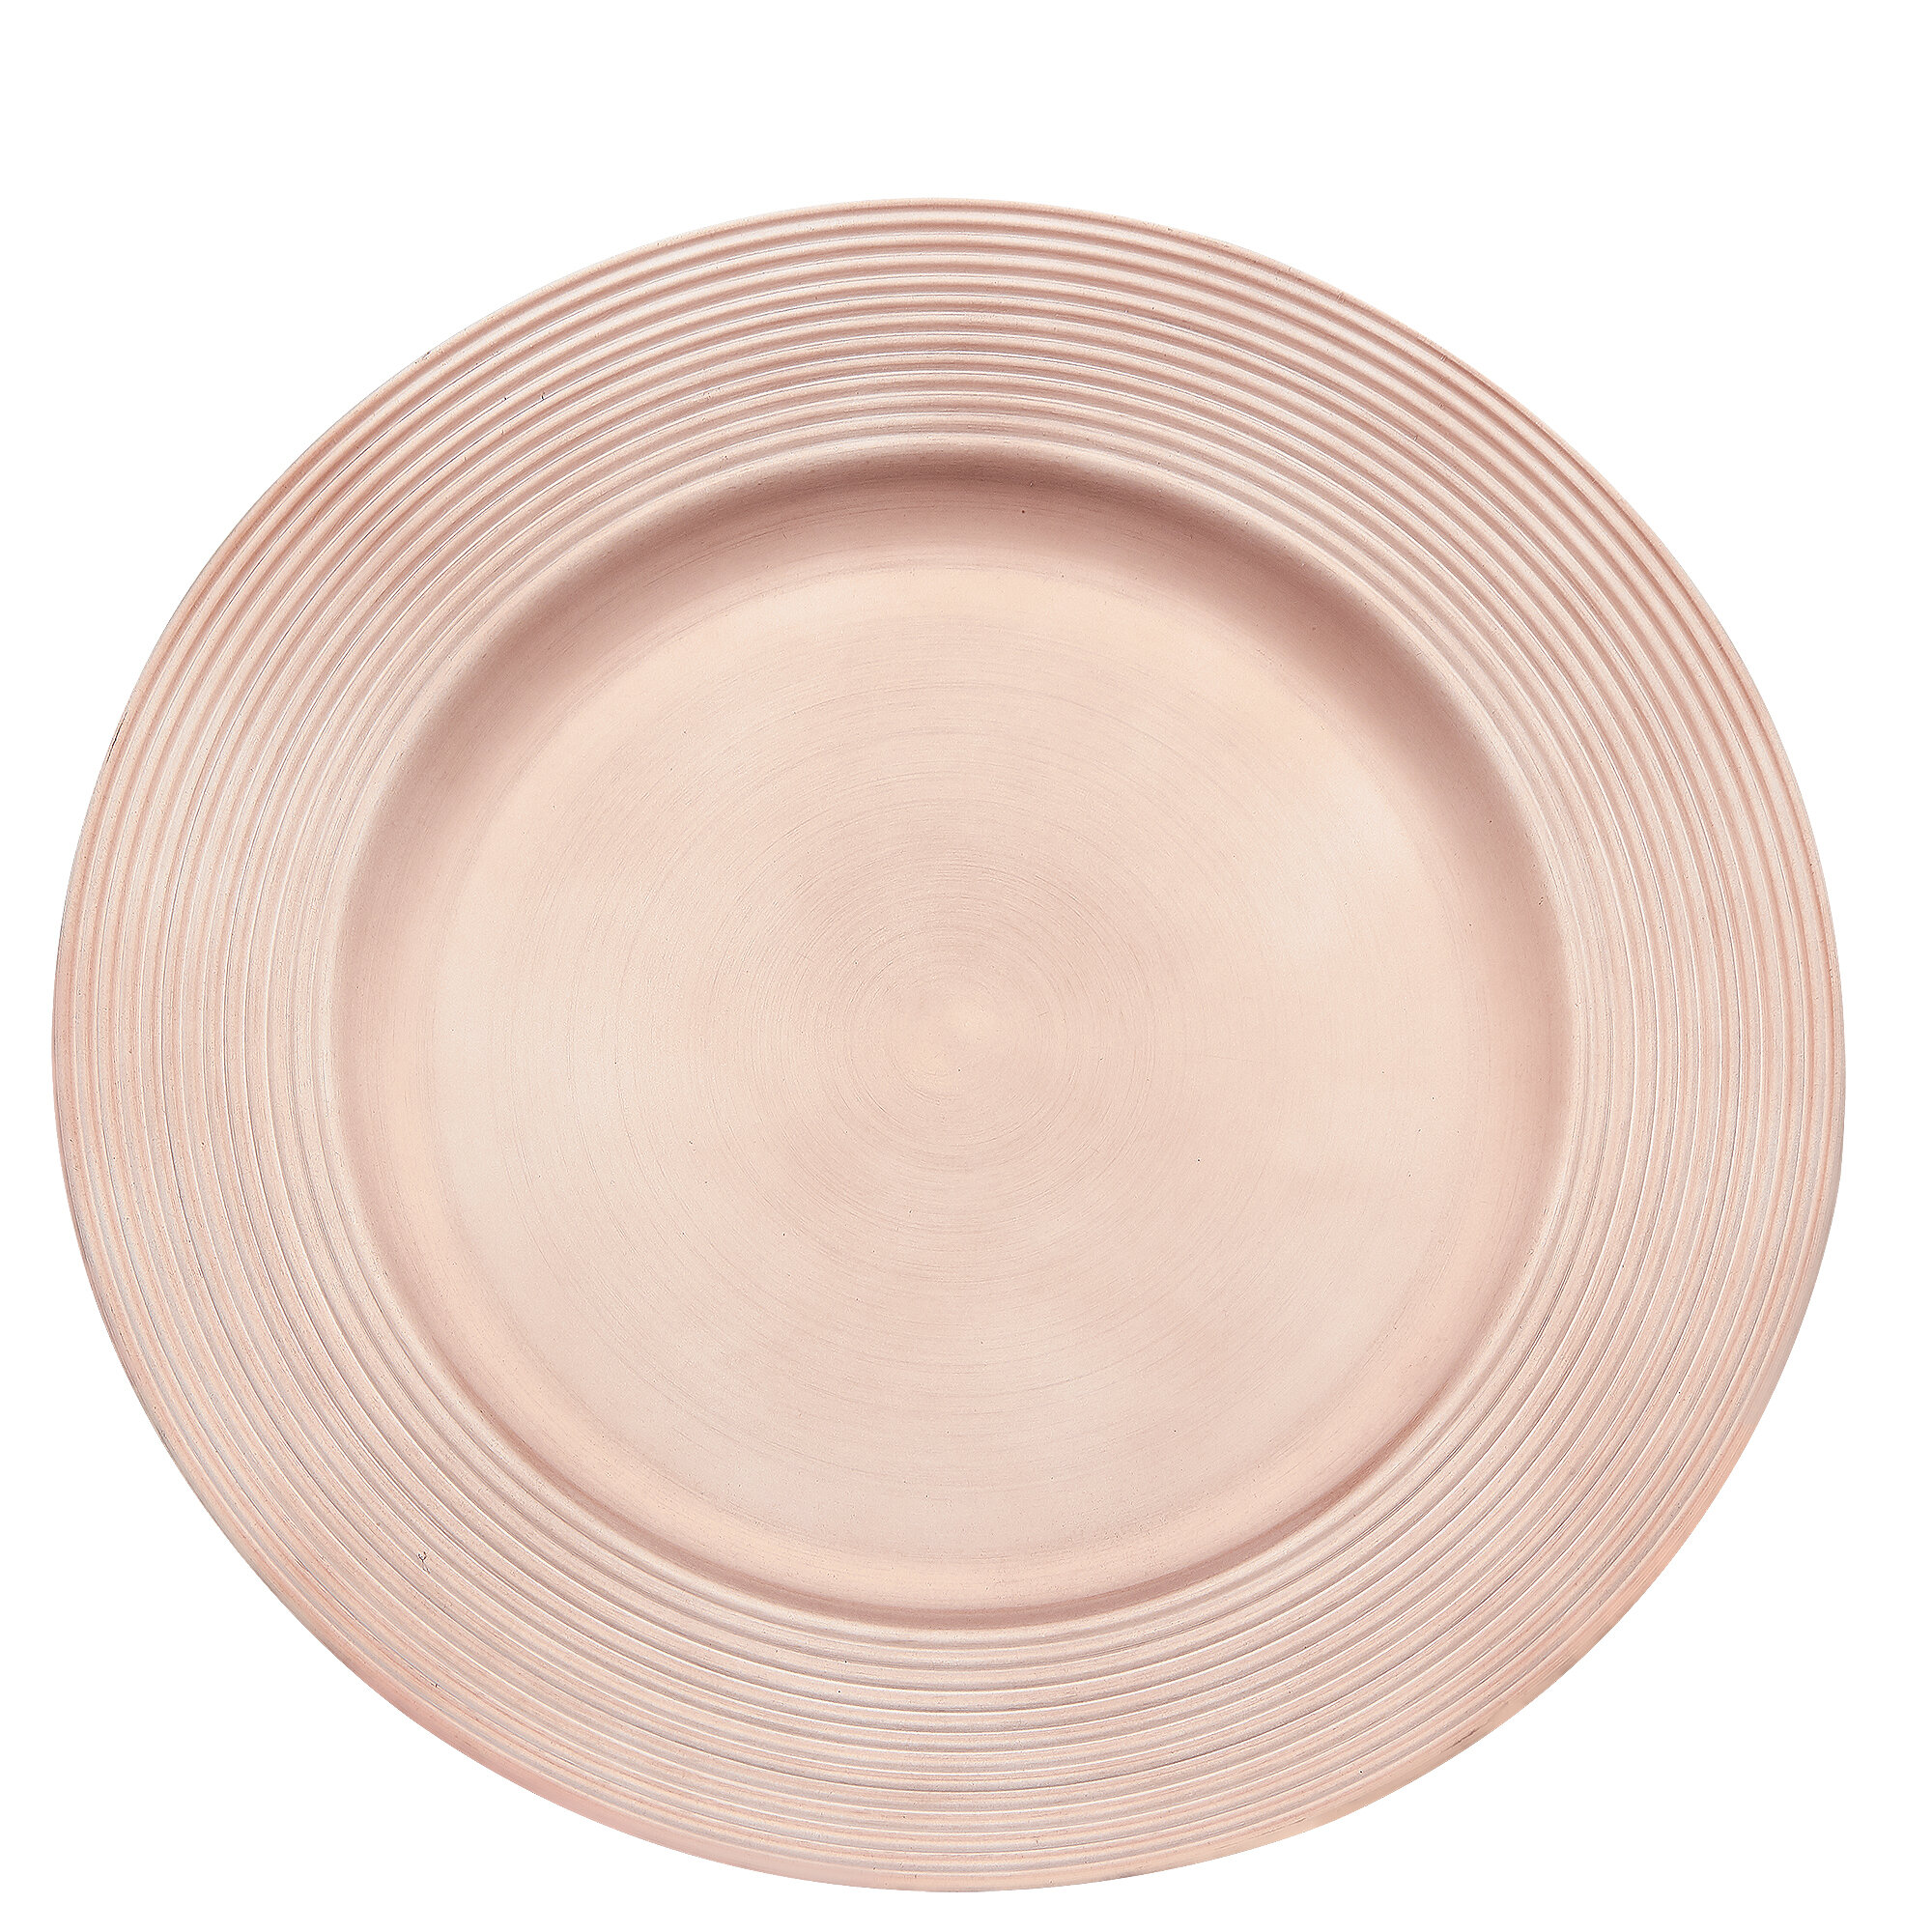 Acrylic Vinyl Grooves Rose Gold Charger $0.95